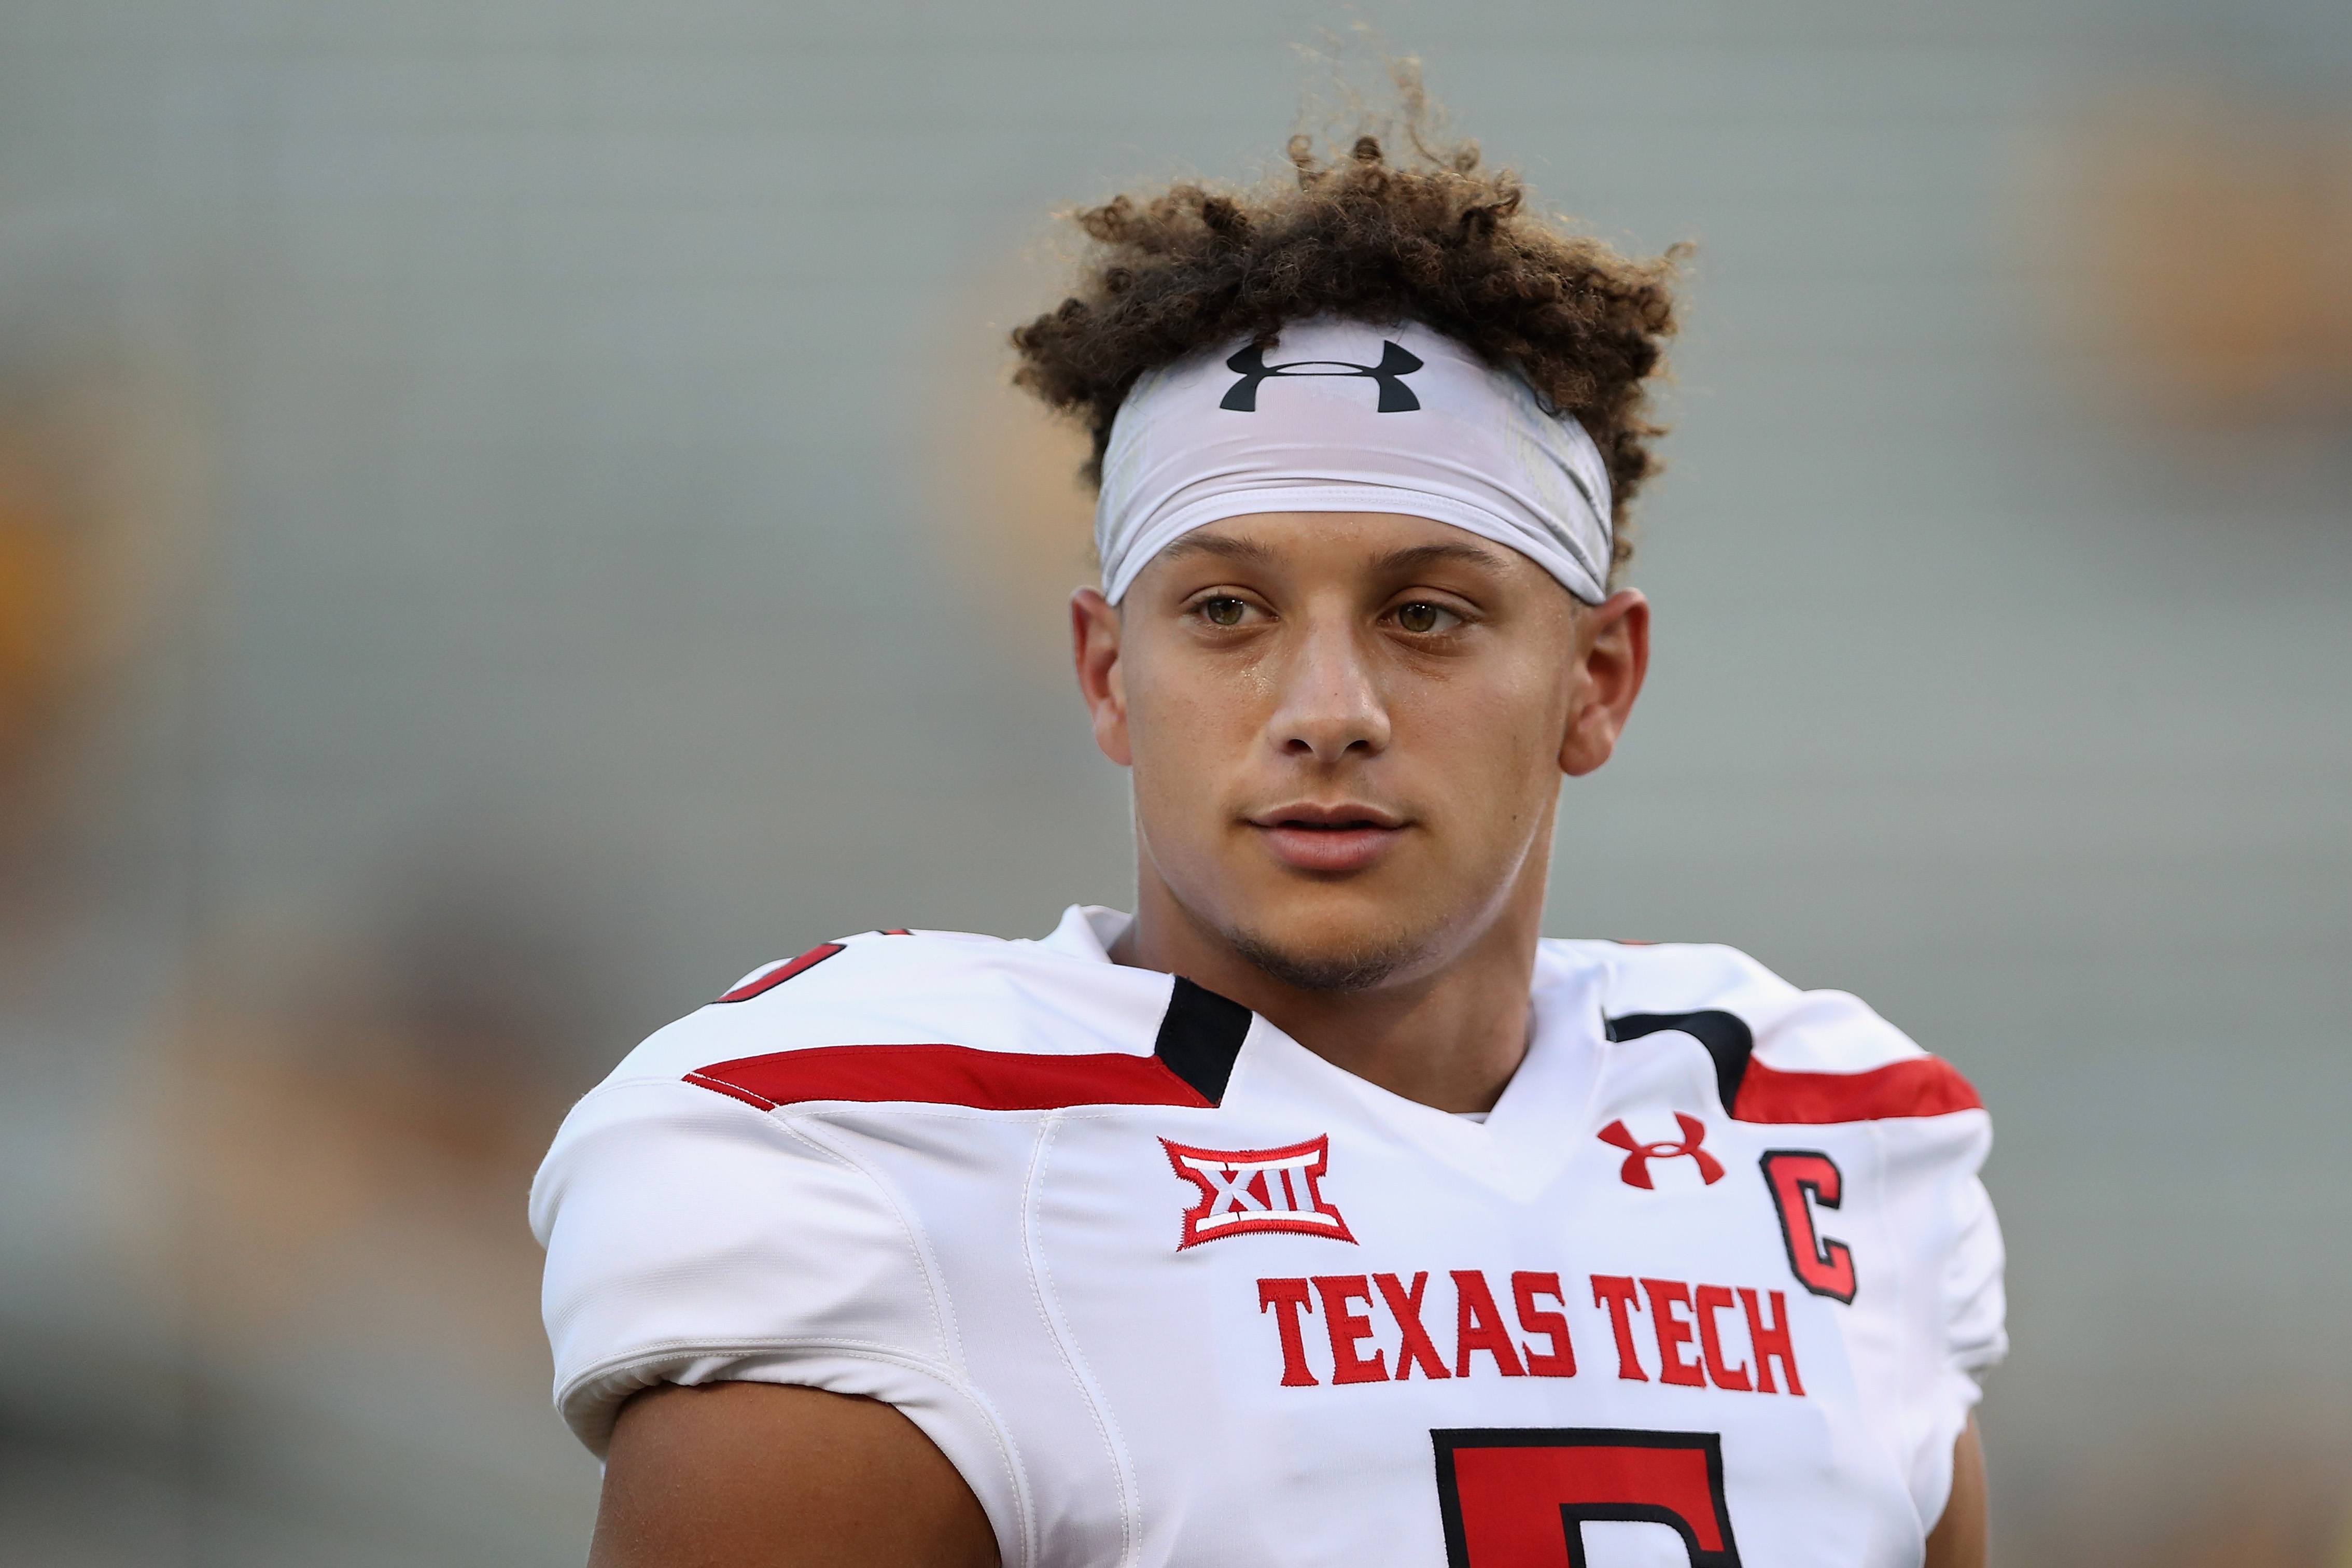 Where Did Patrick Mahomes Grow Up And Go To College